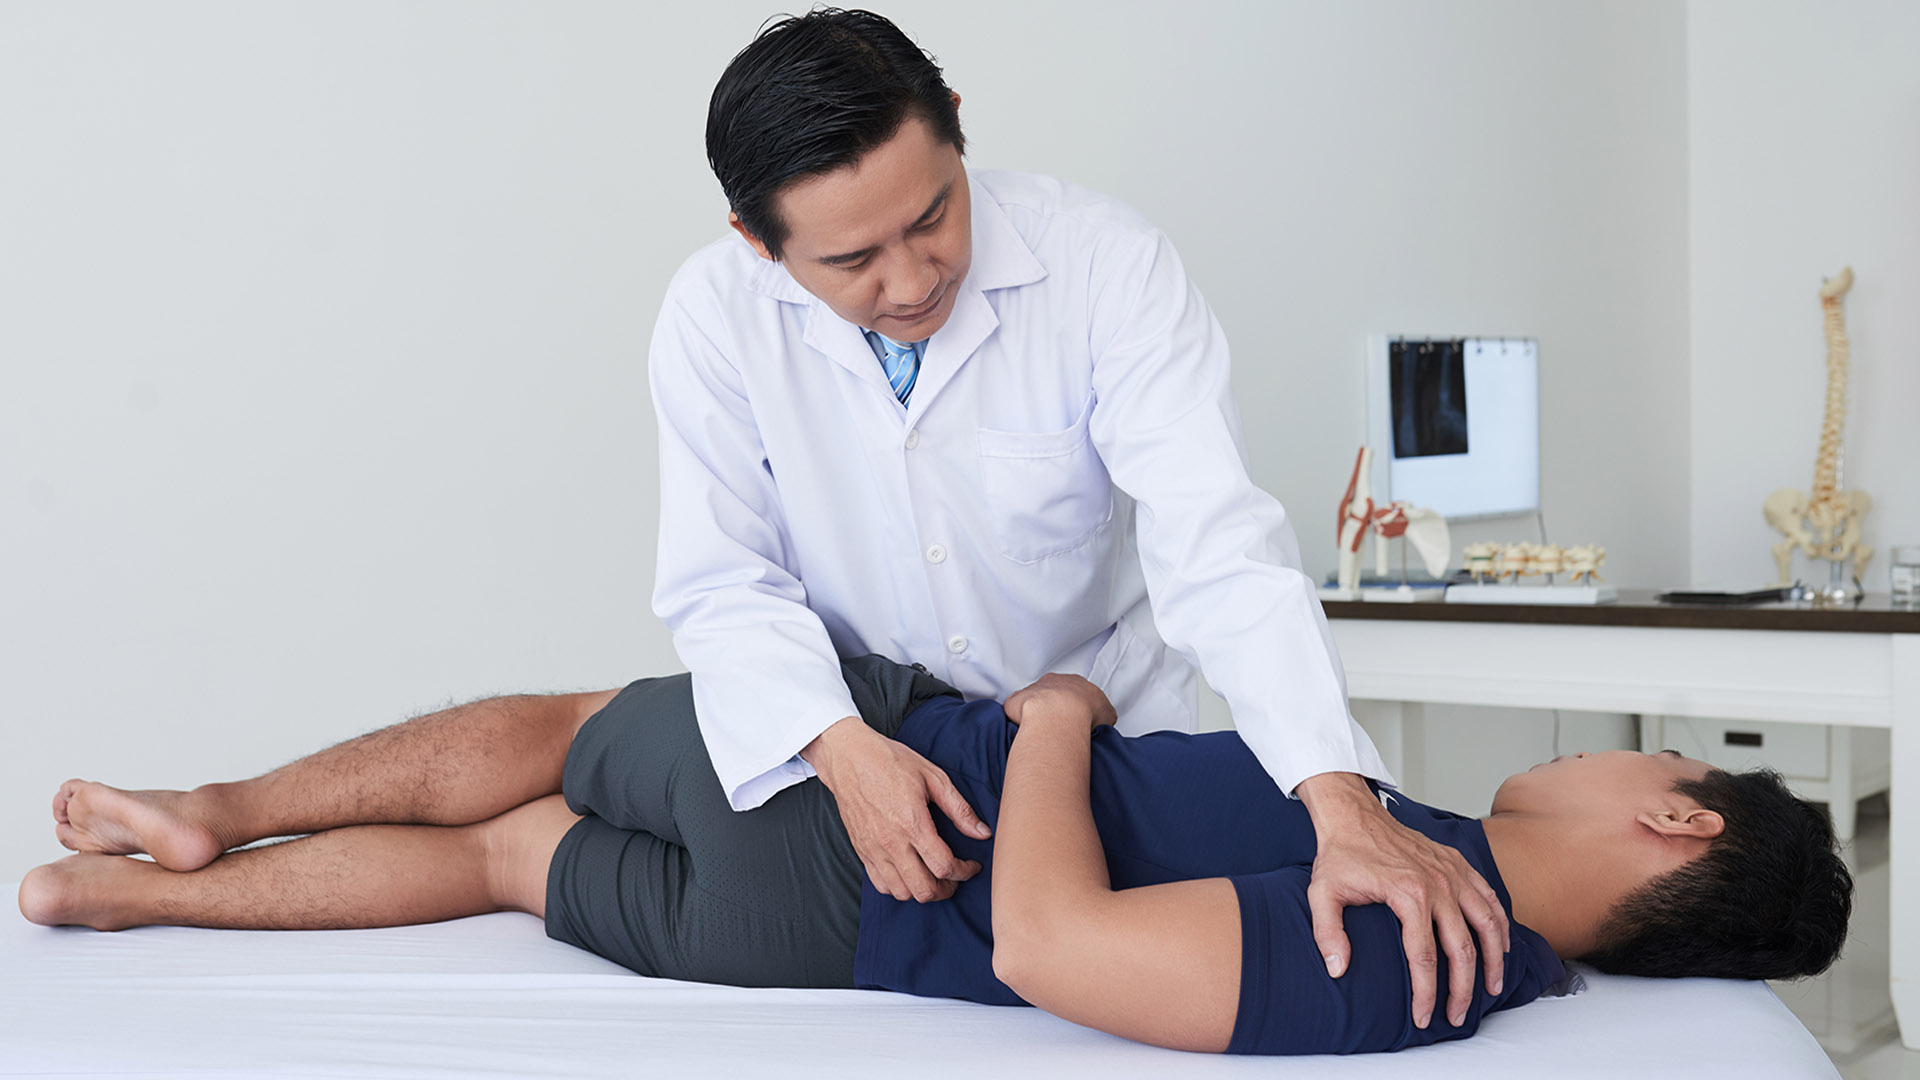 Top Tips And Tricks To Locate The Right Chiropractor